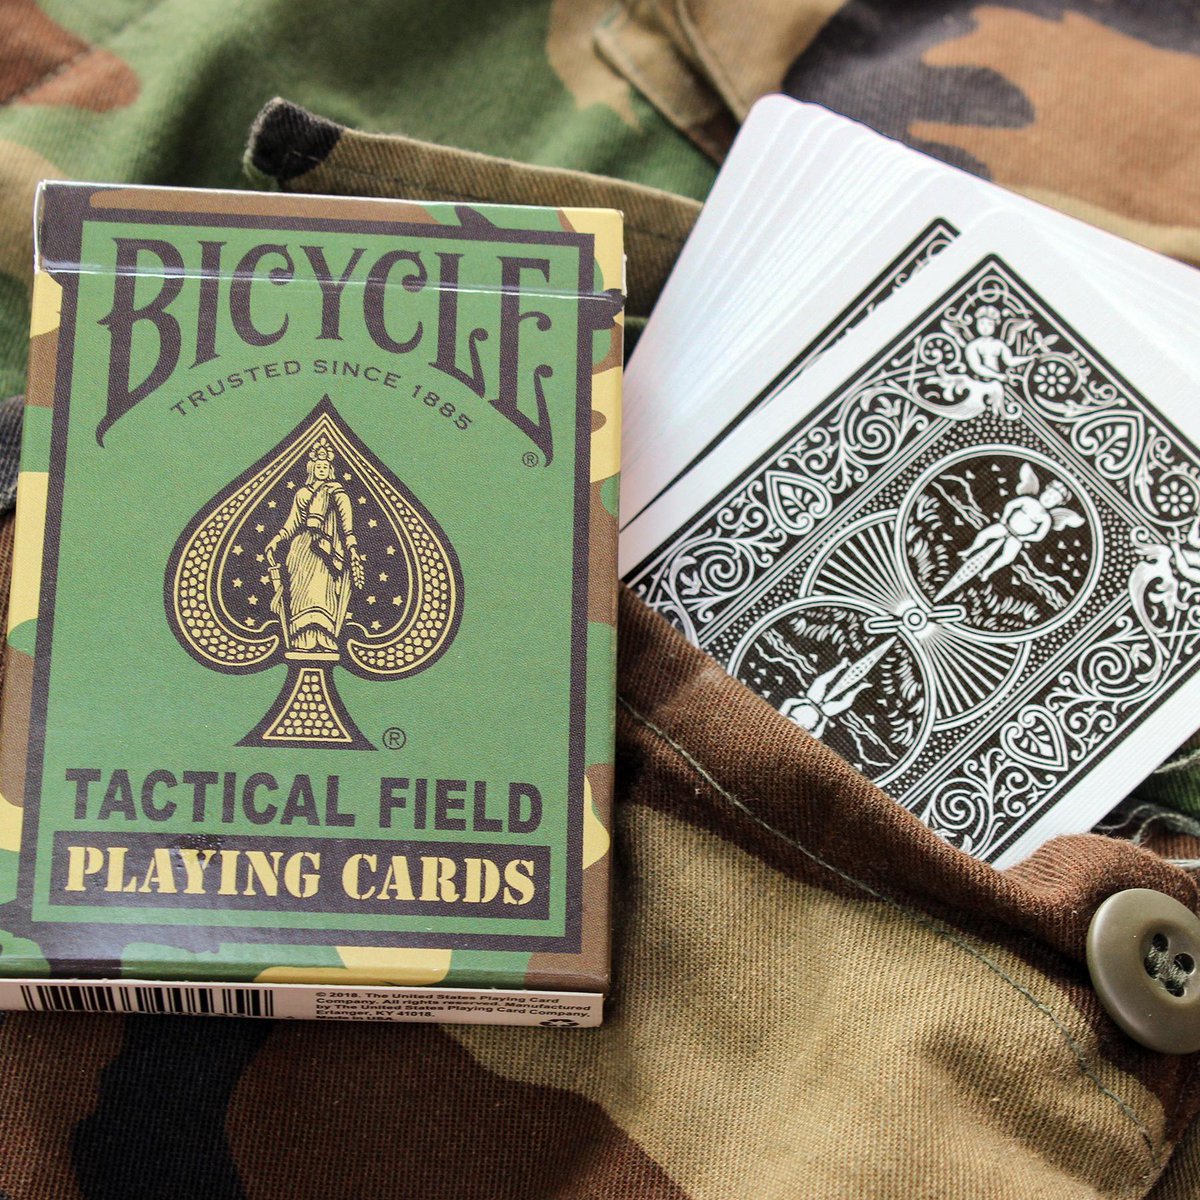 1 Sealed Deck Bicycle Tactical Field Desert Brown Camo Playing Cards 